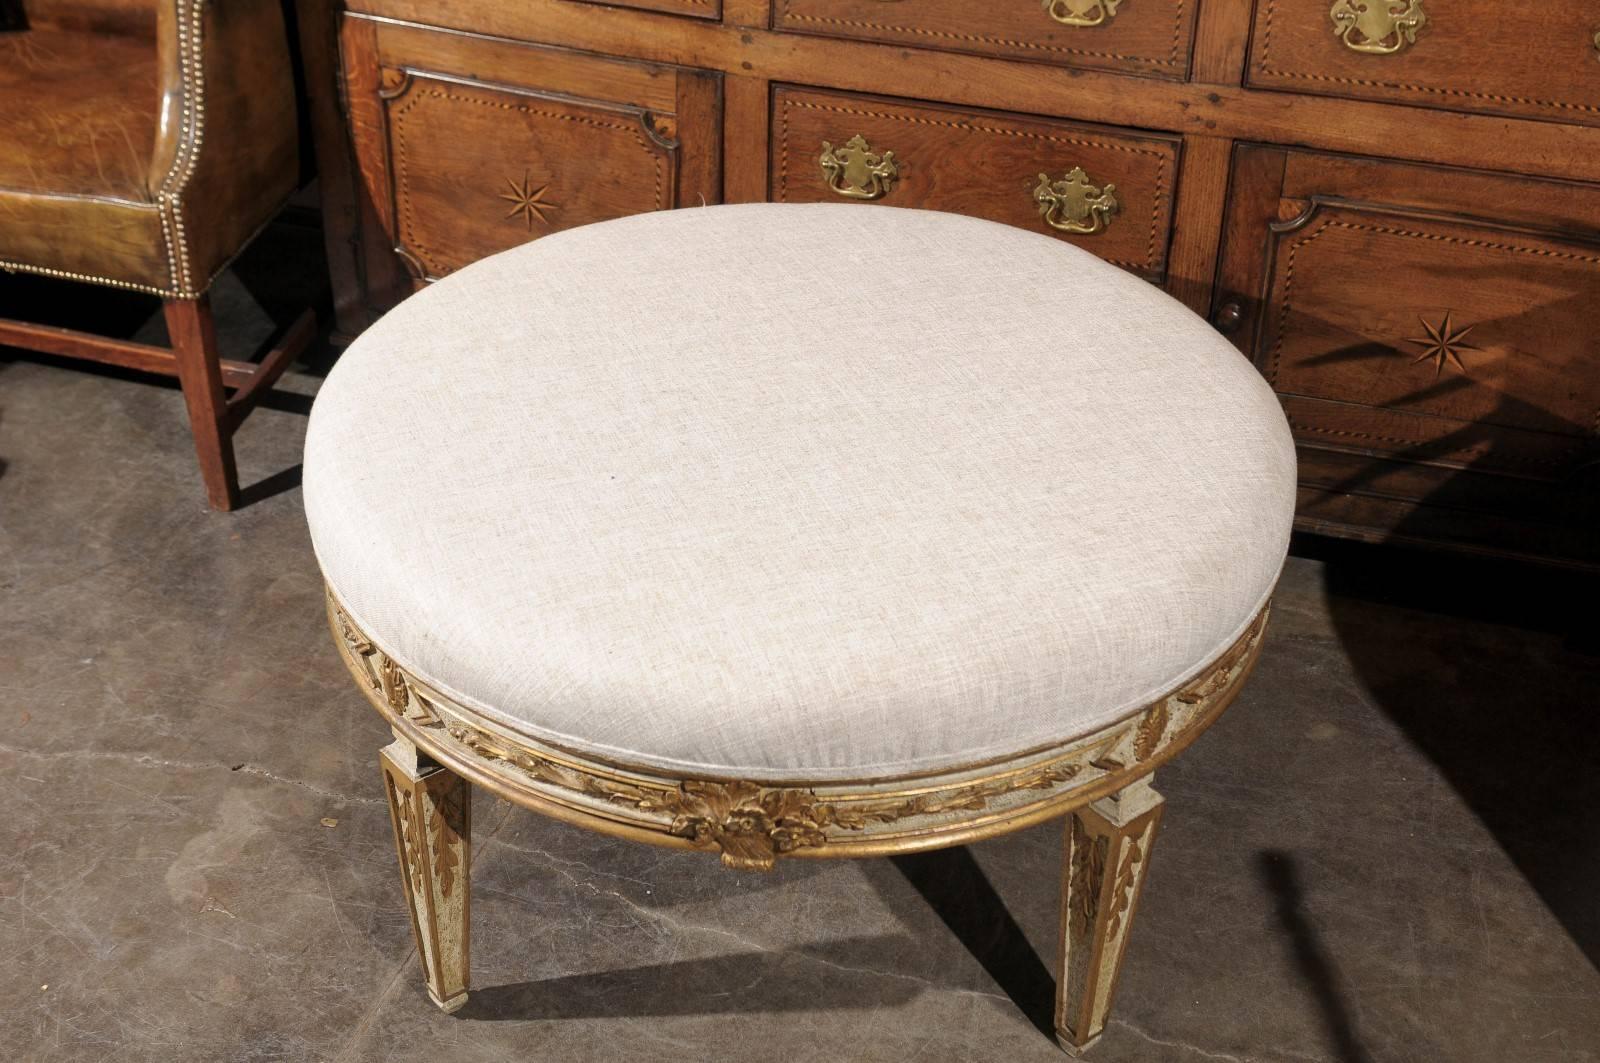 Italian Neoclassical Style Upholstered Round Ottoman with Giltwood Motifs 1